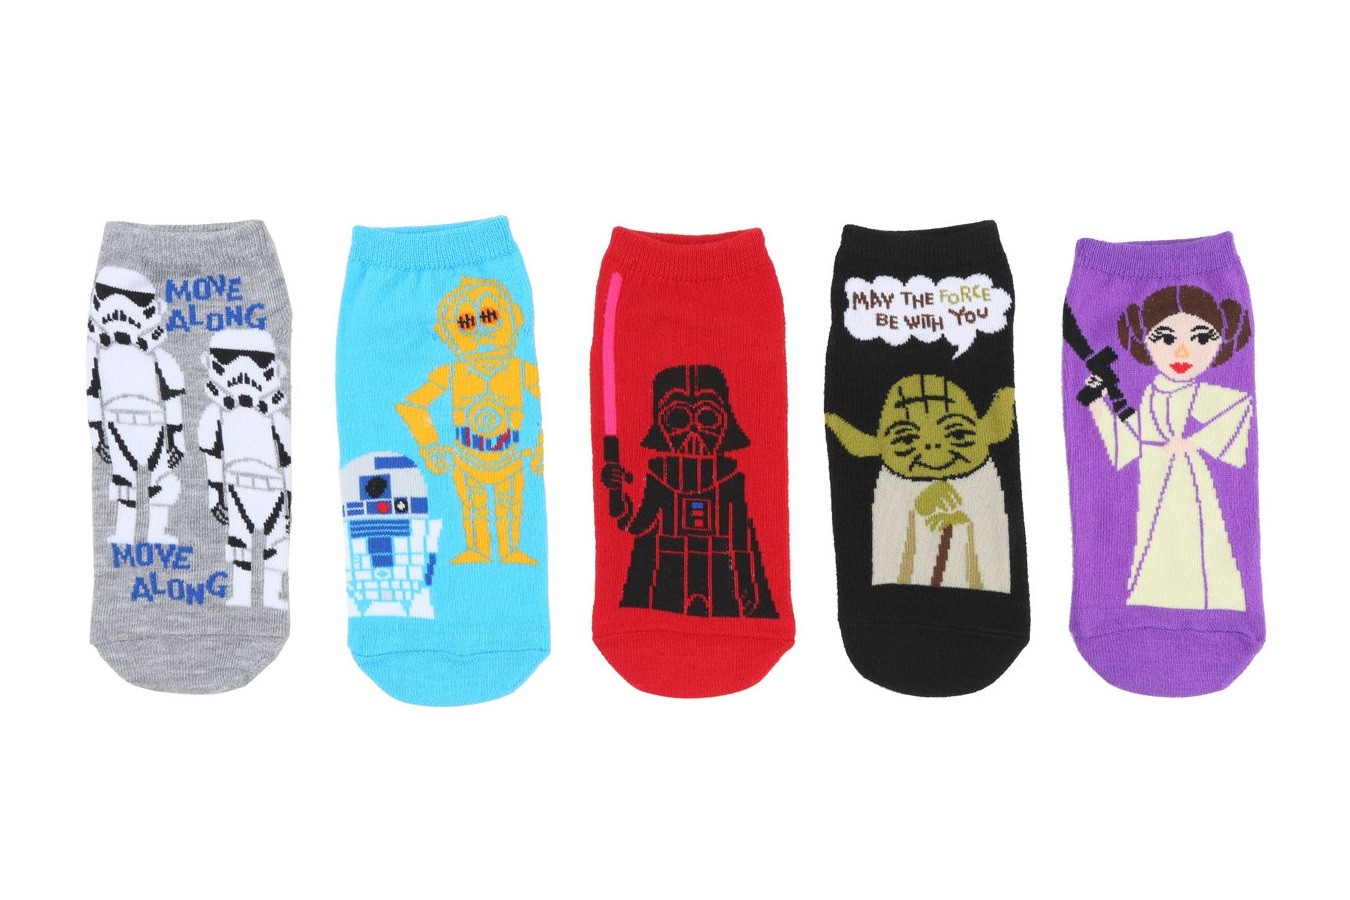 Star Wars bubble art no-show ankle socks available at Hot Topic